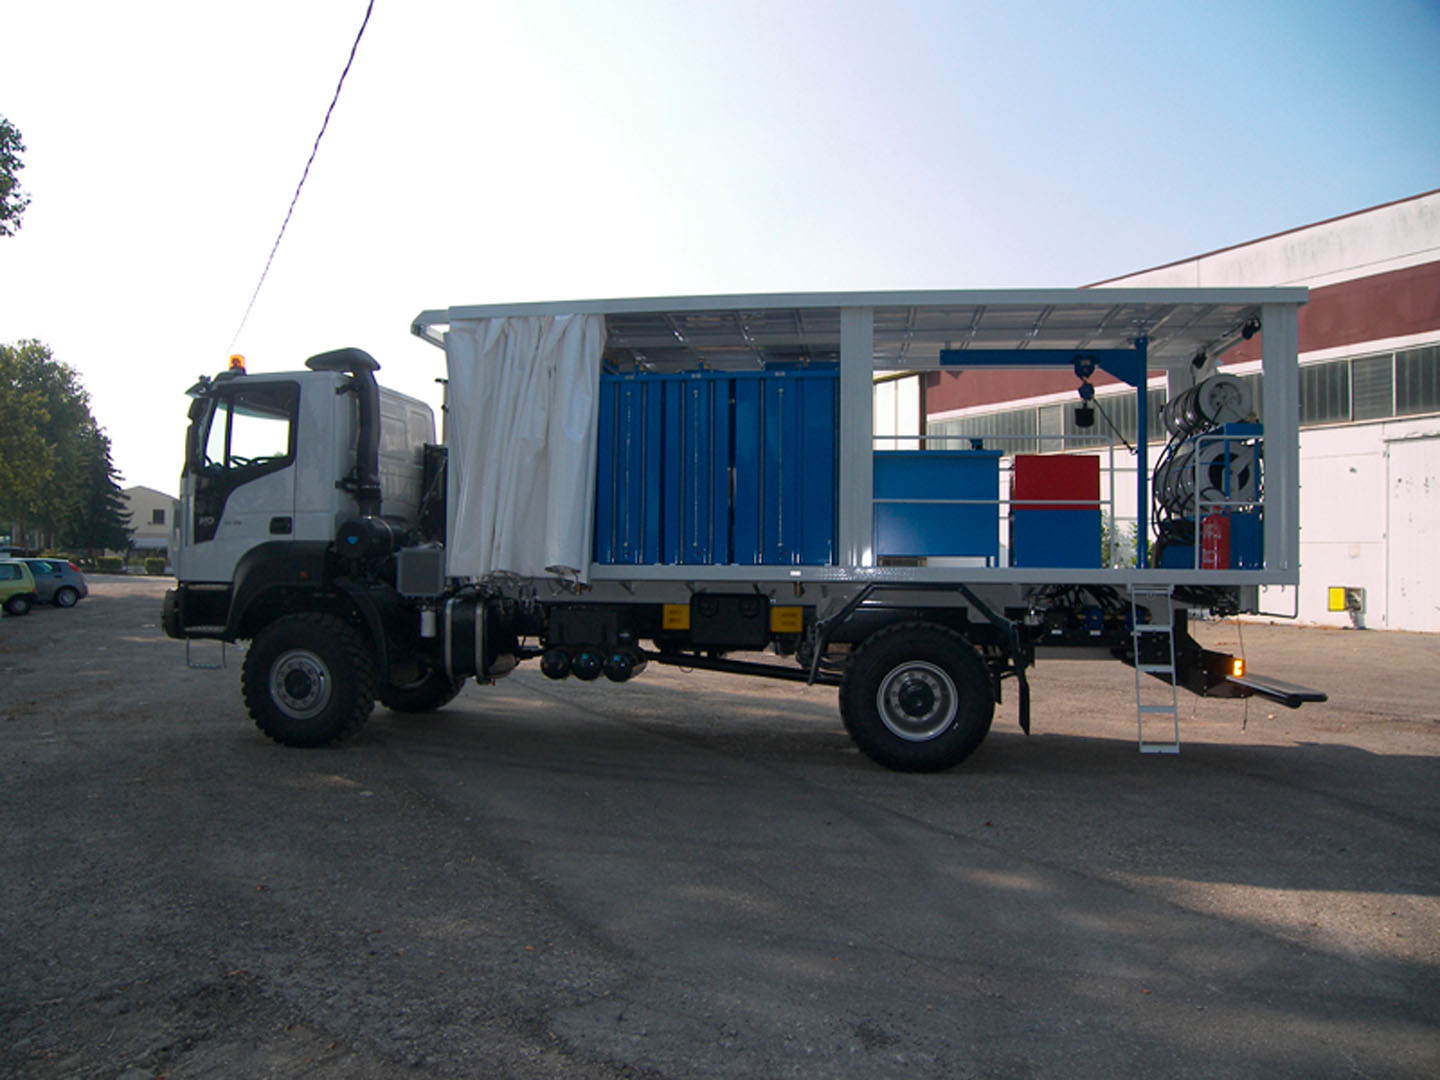 Astra Iveco Mining